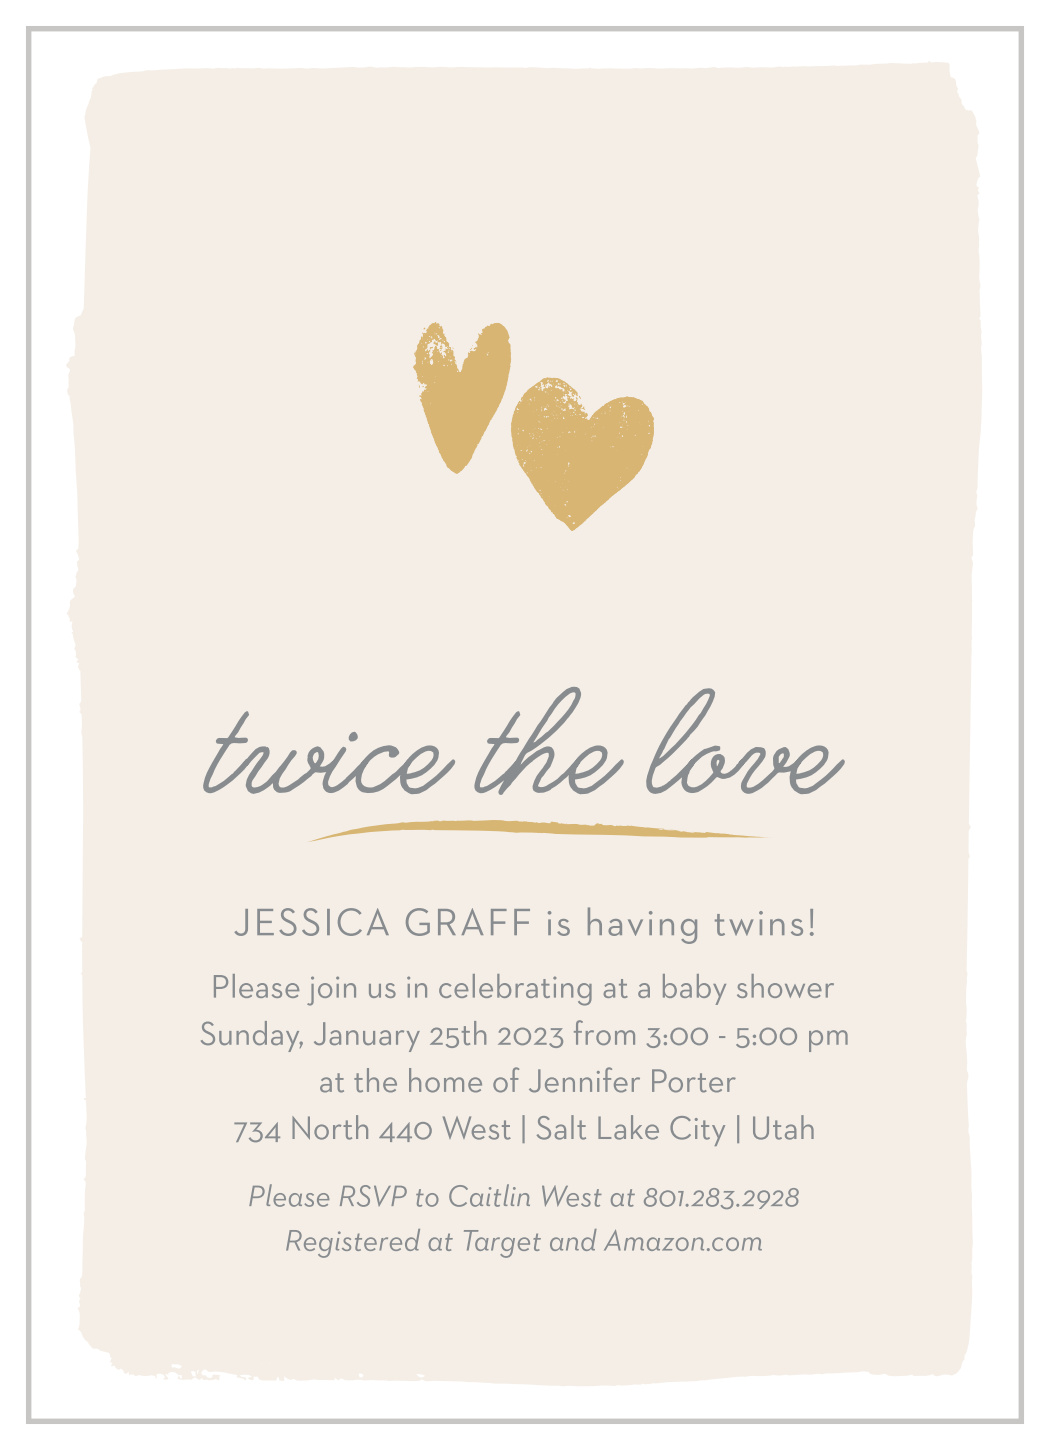 Twice the Love Baby Shower Invitations